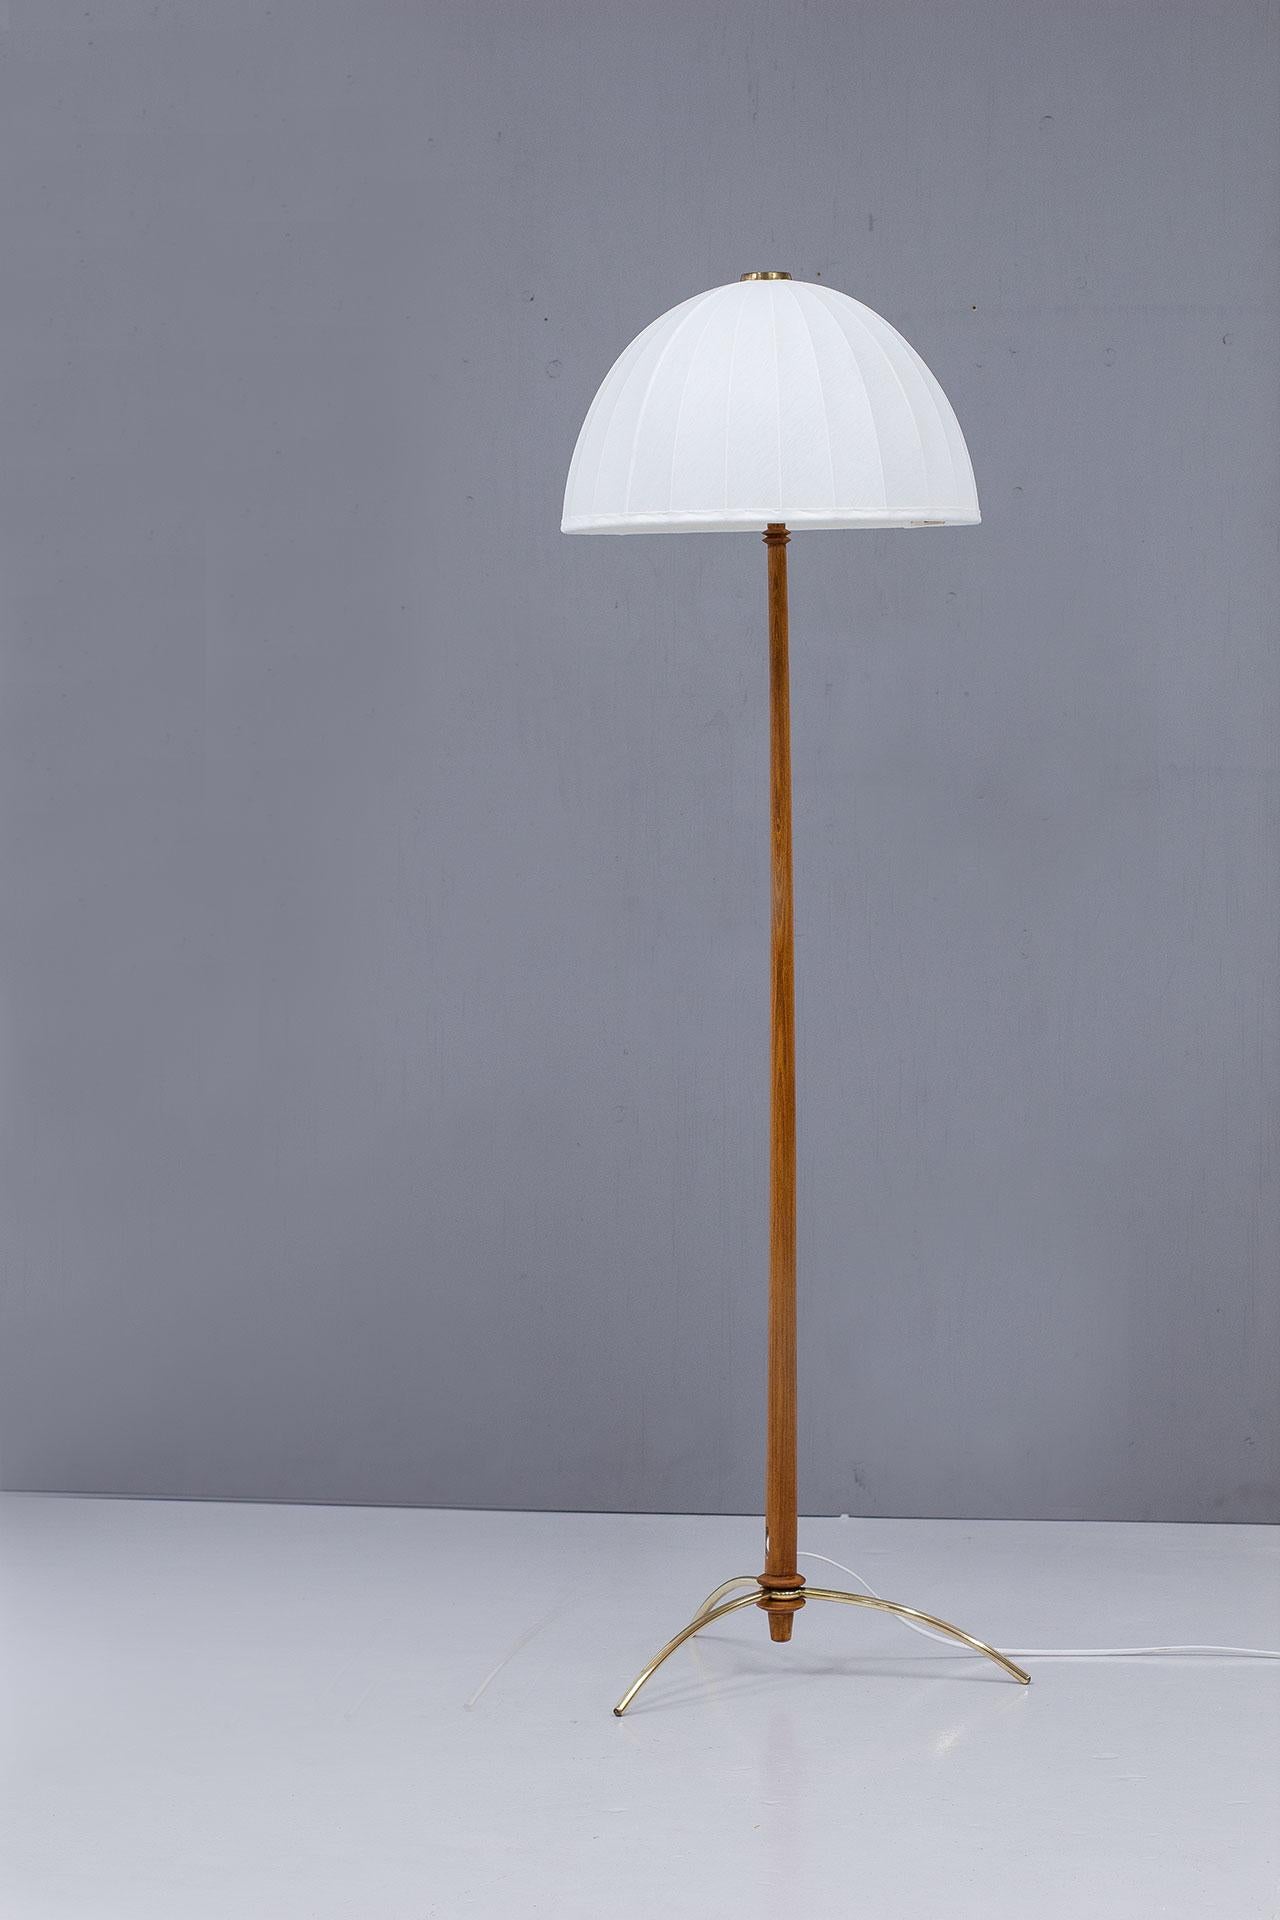 Vintage floor lamp, model G45, designed and manufactured by Hans-Agne Jakobsson in Sweden during the 1950s. The lamp features a stained beech stem and a brass tripod base, it comes with its original lamp shade that has been reupholstered with an